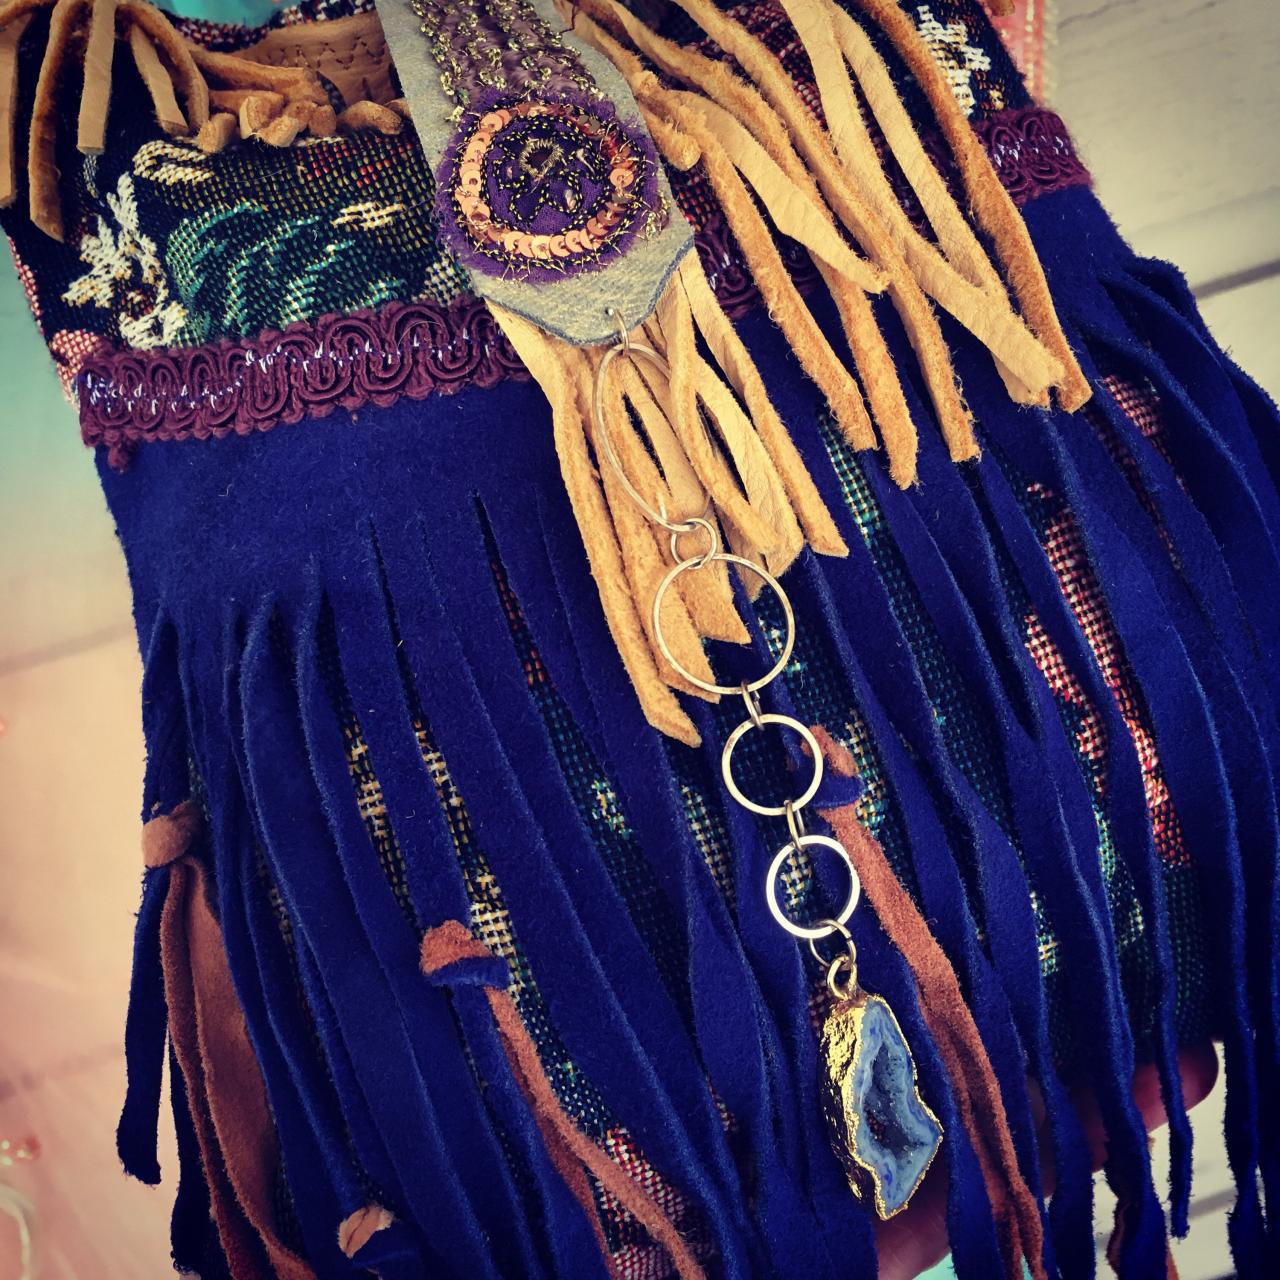 Beautiful Bohemian Bag || Handcrafted || Fringy Leather || 100% Sustainable || One•of•a•kind || Gorgeous Textiles || Gem Stone || Ocean